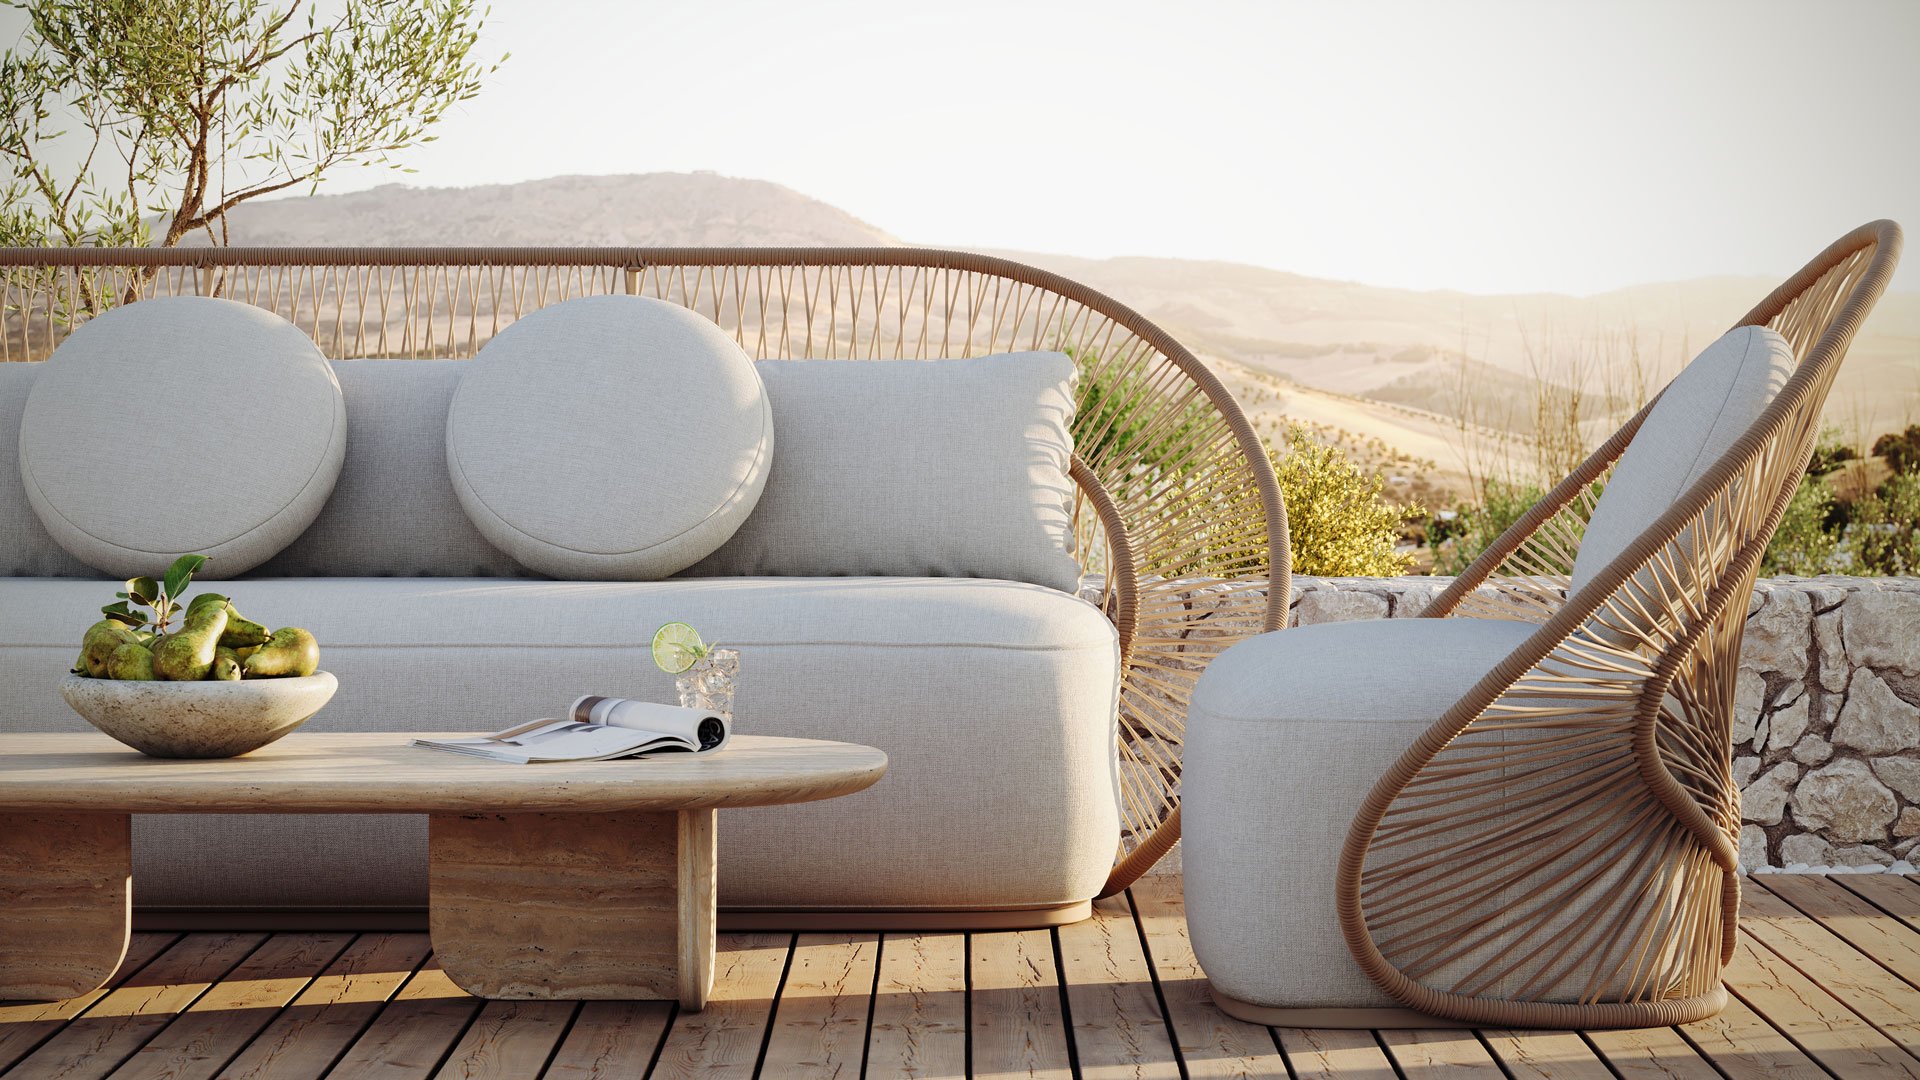 CGI Environment for Outdoor Furniture